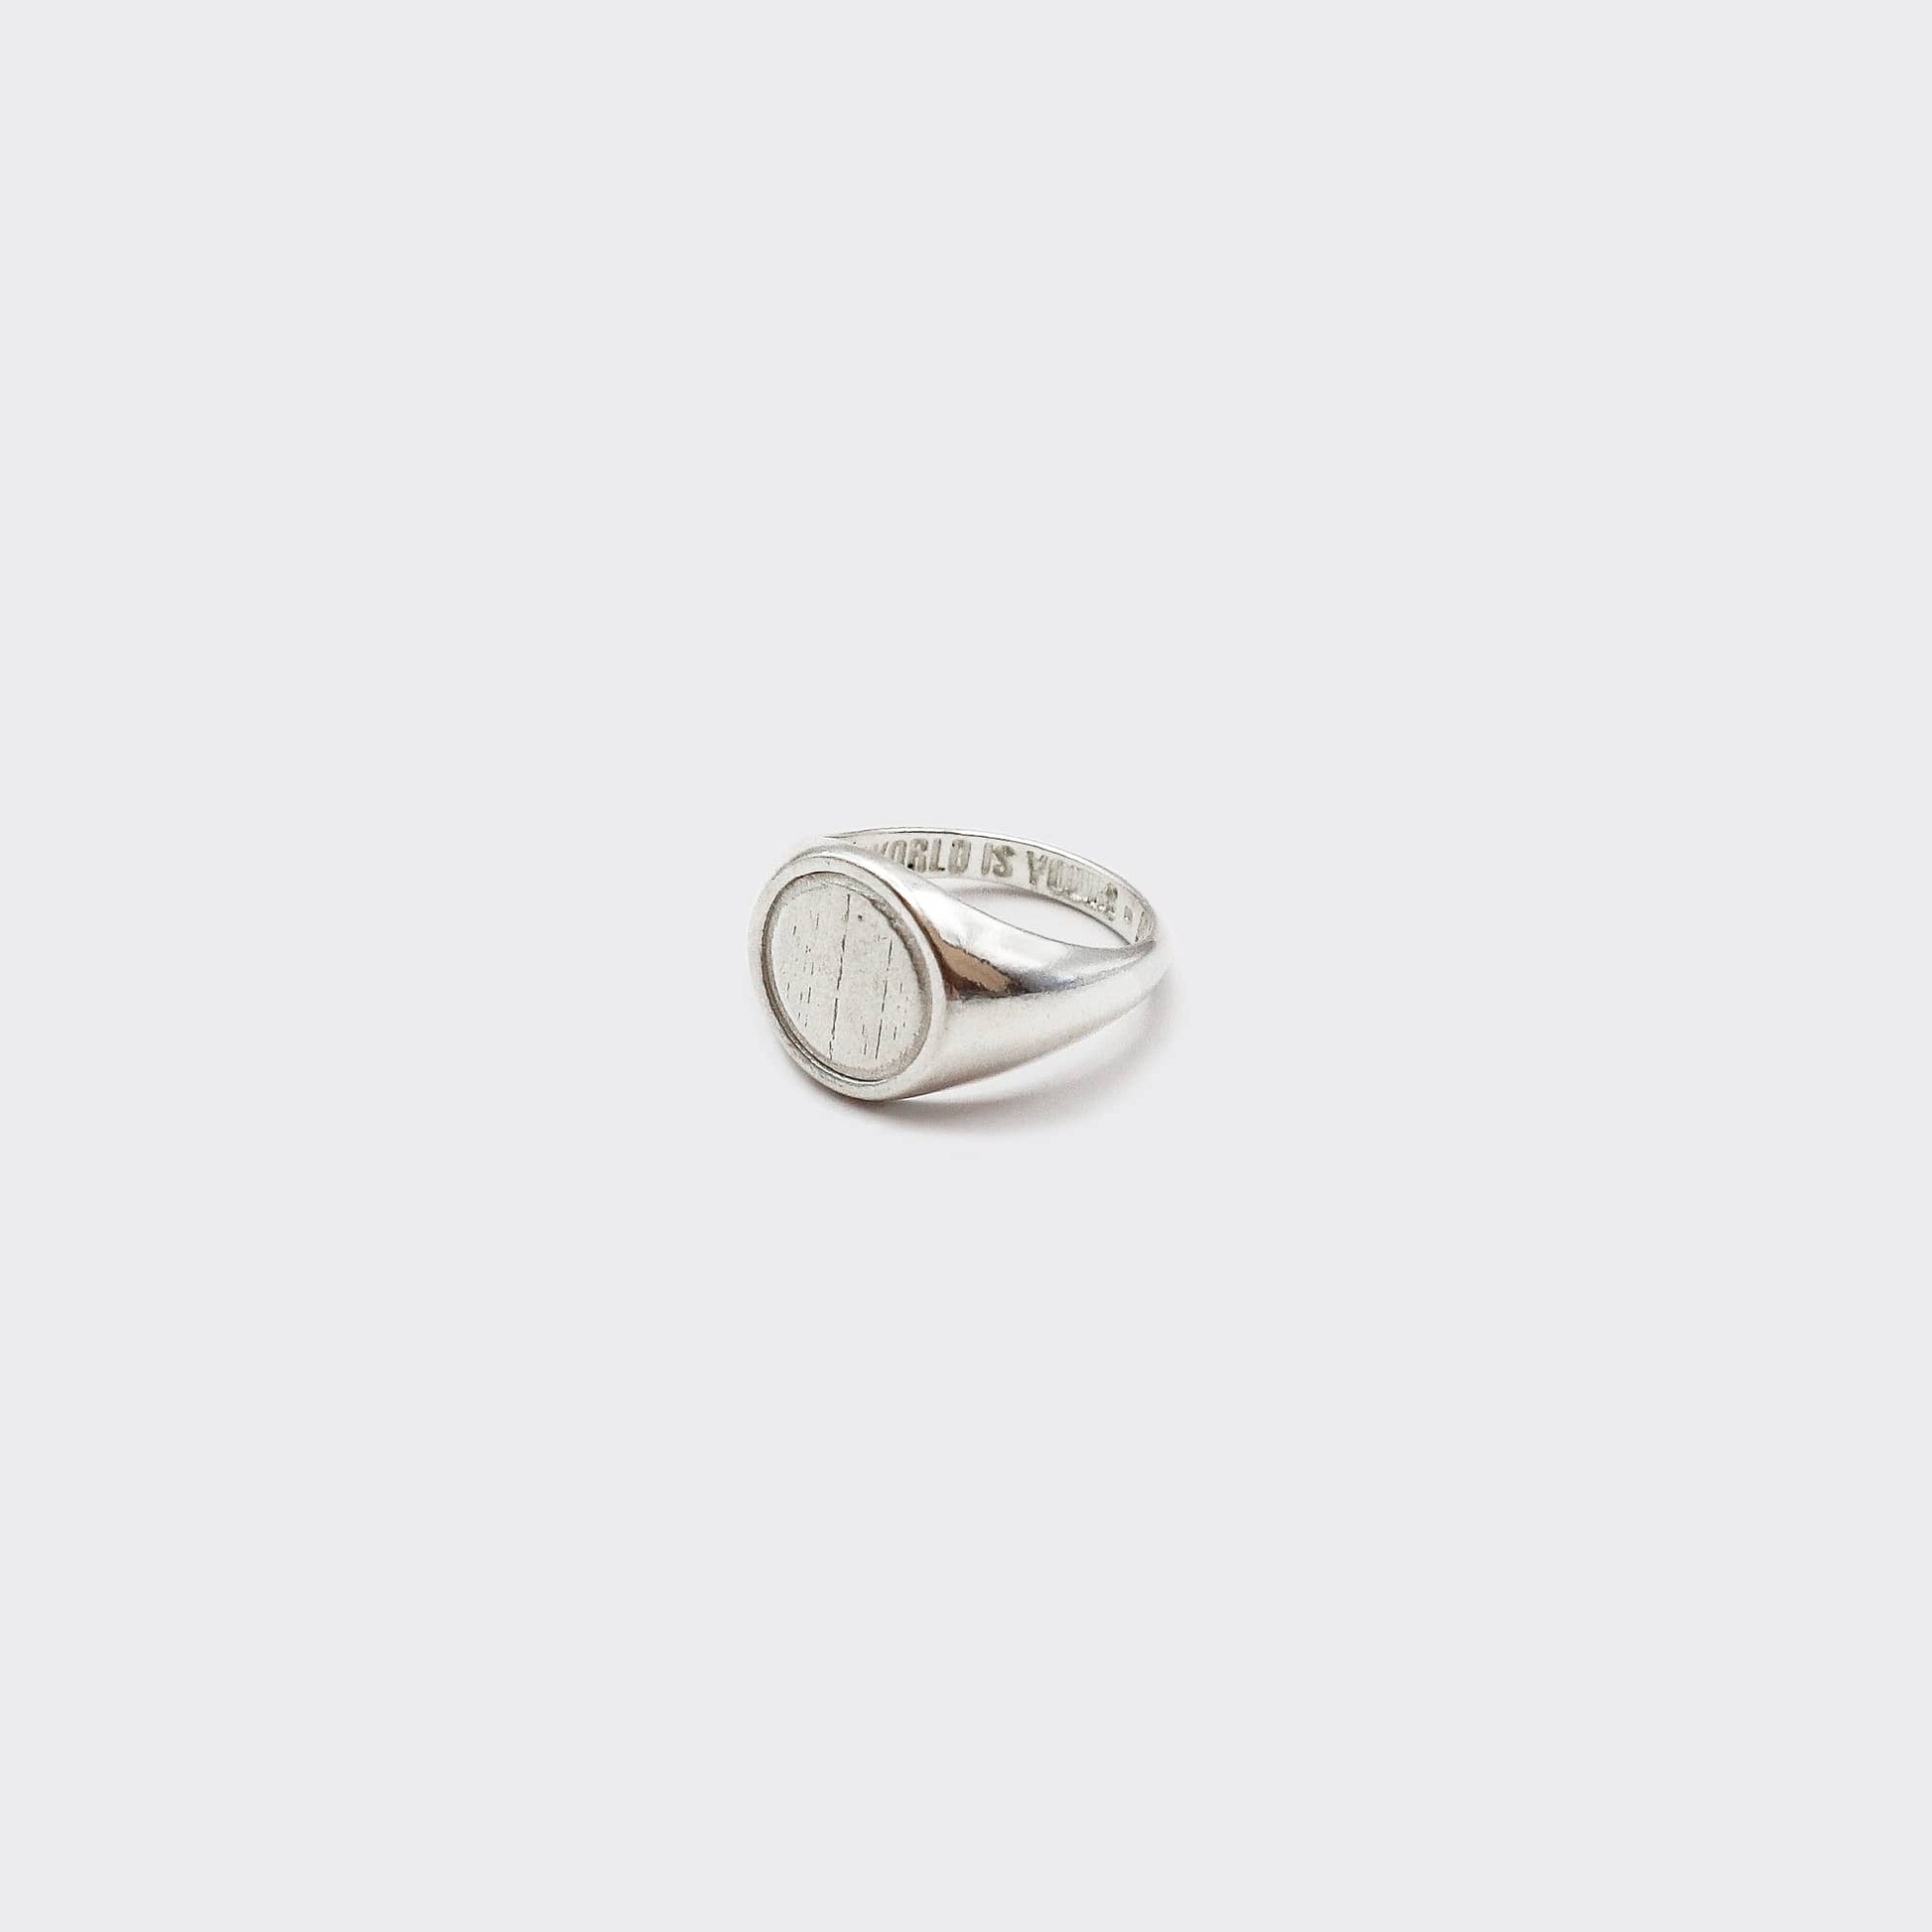 Atelier Domingo's Original silver ring is made in Spain. This unisex ring is for both men and women. This jewelry is made of a high-quality 925 Sterling silver plating. A timeless ring for both men and women.